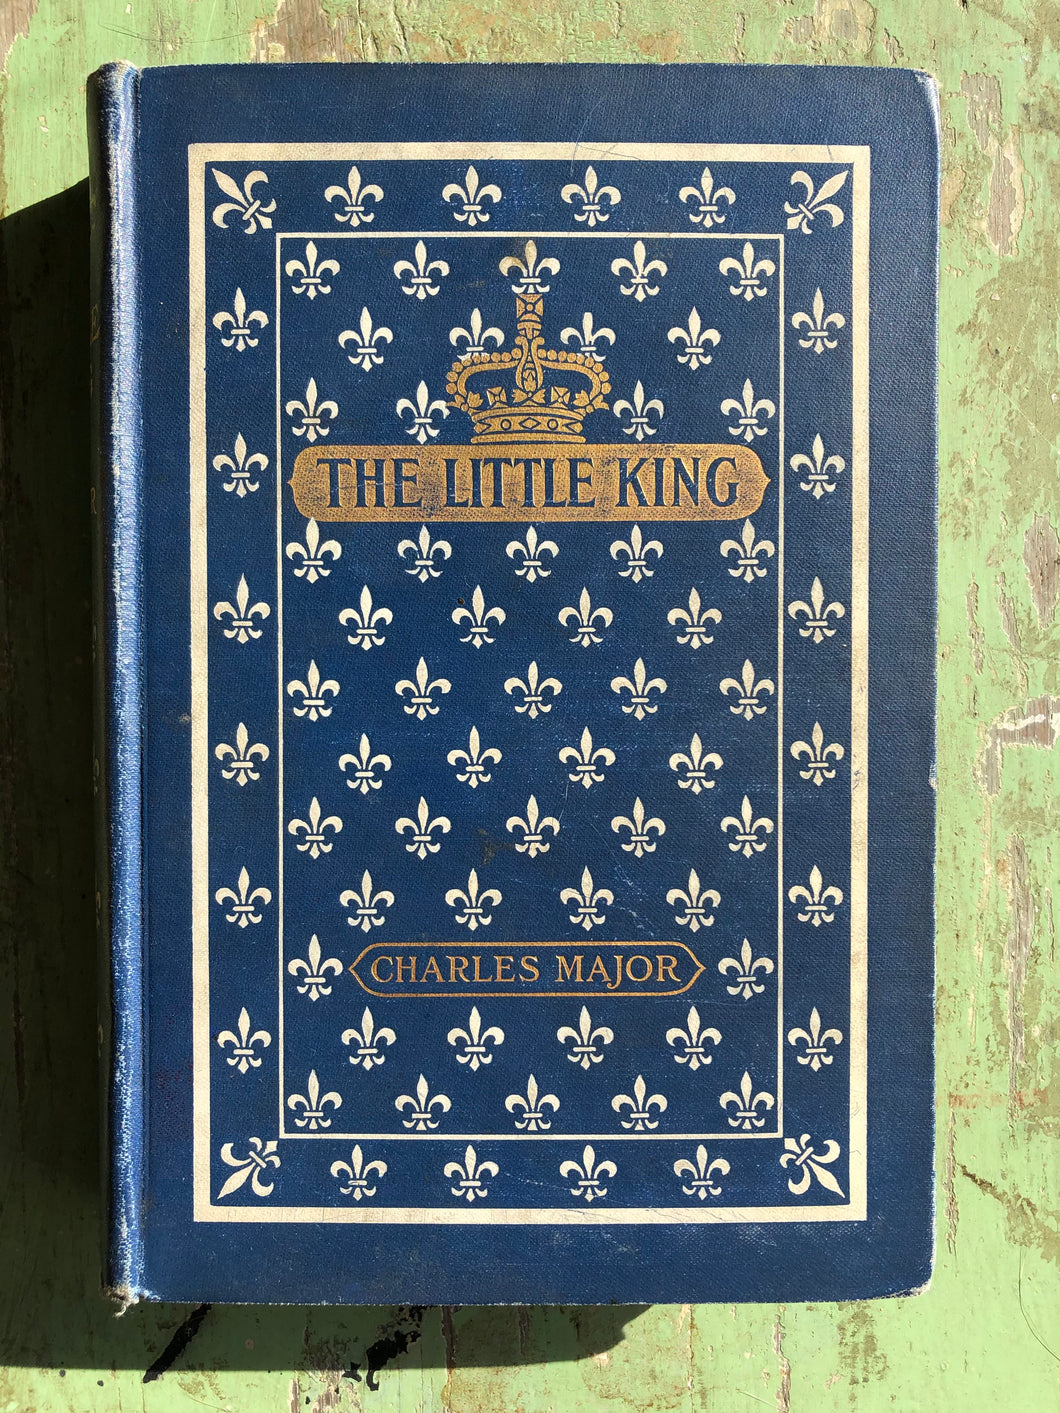 The Little King: A Story of the Childhood of Louis XIV, King of France by Charles Major